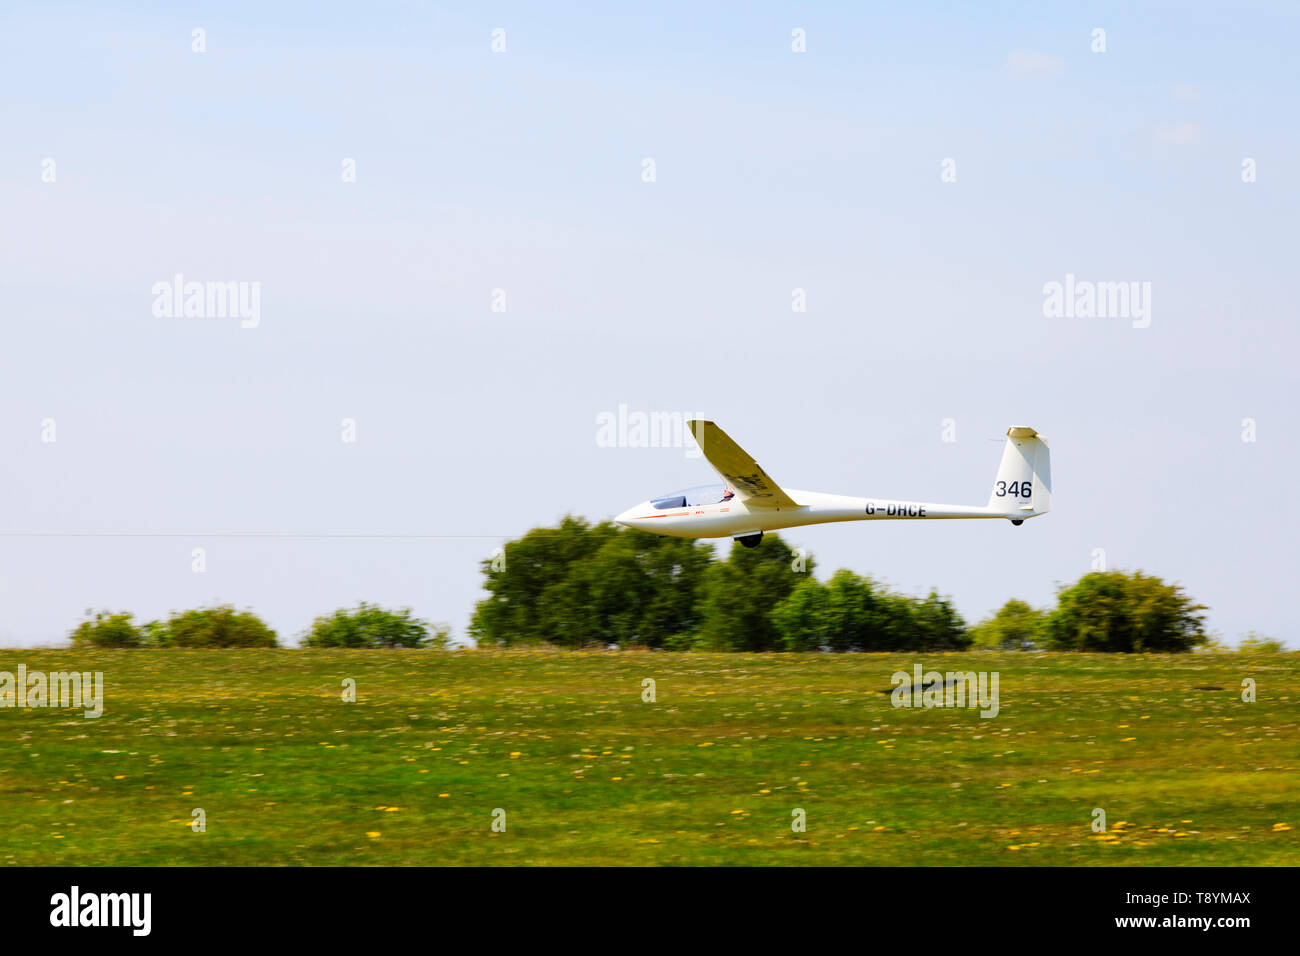 Alexander Schleicher ASW19b glider launching on aerotow, Yorkshire Gliding Club airfield at Sutton Bank in the North Yorkshire Moors National Park. Stock Photo